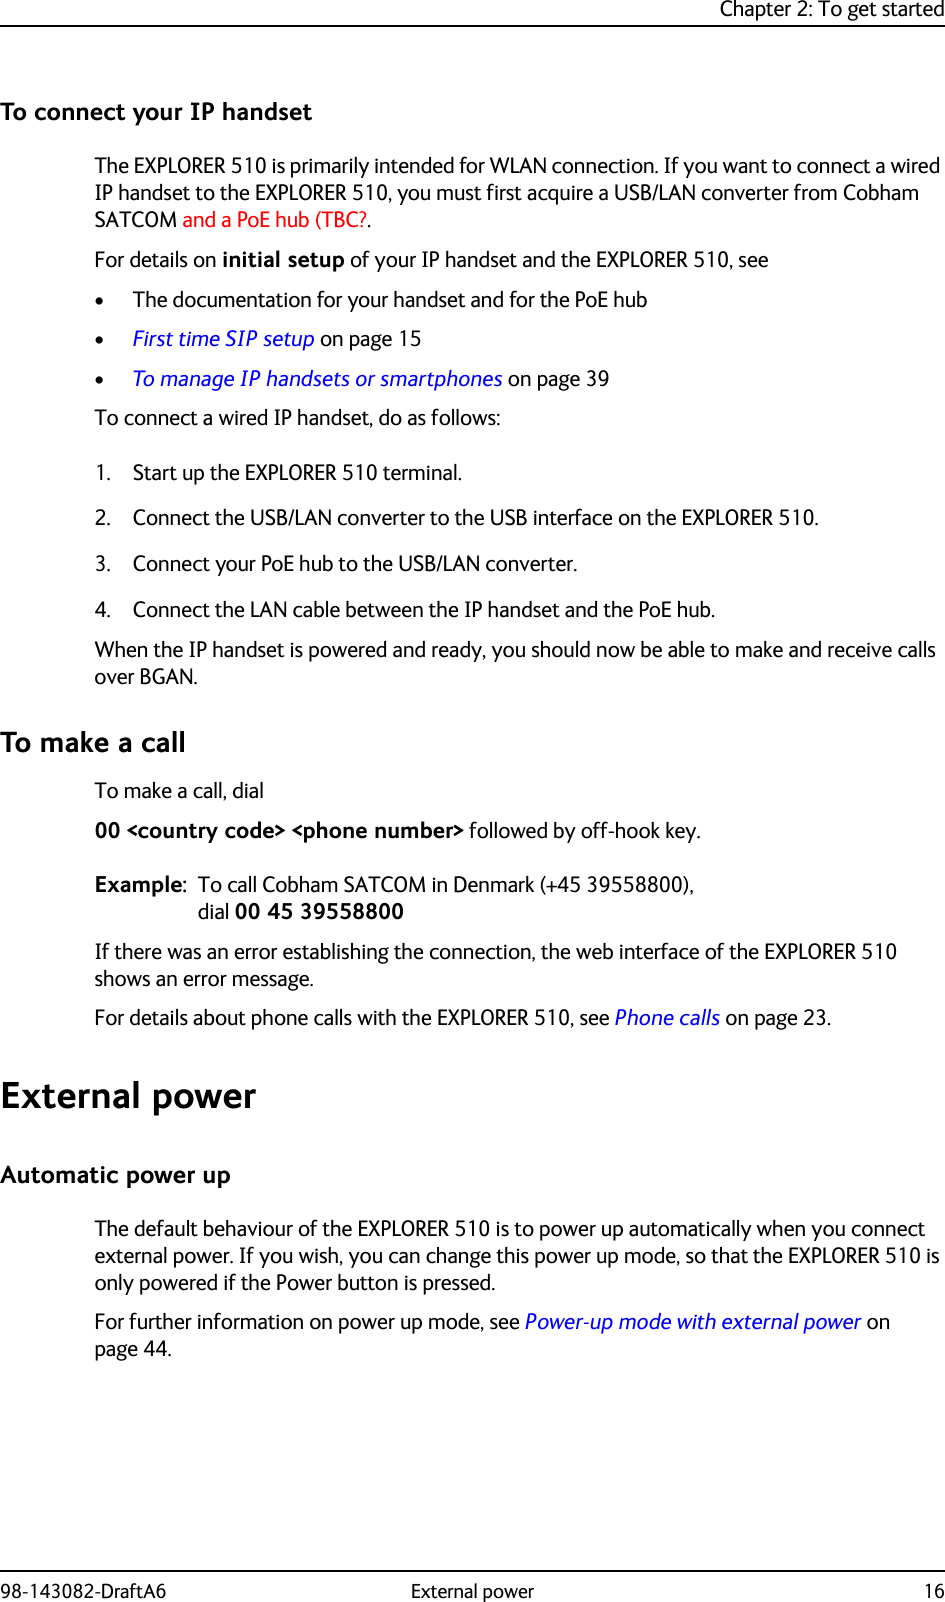 Chapter 2: To get started98-143082-DraftA6 External power 16To connect your IP handsetThe EXPLORER 510 is primarily intended for WLAN connection. If you want to connect a wired IP handset to the EXPLORER 510, you must first acquire a USB/LAN converter from Cobham SATCOM and a PoE hub (TBC?.For details on initial setup of your IP handset and the EXPLORER 510, see • The documentation for your handset and for the PoE hub•First time SIP setup on page 15•To manage IP handsets or smartphones on page 39To connect a wired IP handset, do as follows:1. Start up the EXPLORER 510 terminal.2. Connect the USB/LAN converter to the USB interface on the EXPLORER 510.3. Connect your PoE hub to the USB/LAN converter.4. Connect the LAN cable between the IP handset and the PoE hub.When the IP handset is powered and ready, you should now be able to make and receive calls over BGAN.To make a callTo make a call, dial00 &lt;country code&gt; &lt;phone number&gt; followed by off-hook key.Example: To call Cobham SATCOM in Denmark (+45 39558800), dial 00 45 39558800If there was an error establishing the connection, the web interface of the EXPLORER 510 shows an error message.For details about phone calls with the EXPLORER 510, see Phone calls on page 23.External powerAutomatic power upThe default behaviour of the EXPLORER 510 is to power up automatically when you connect external power. If you wish, you can change this power up mode, so that the EXPLORER 510 is only powered if the Power button is pressed.For further information on power up mode, see Power-up mode with external power on page 44.